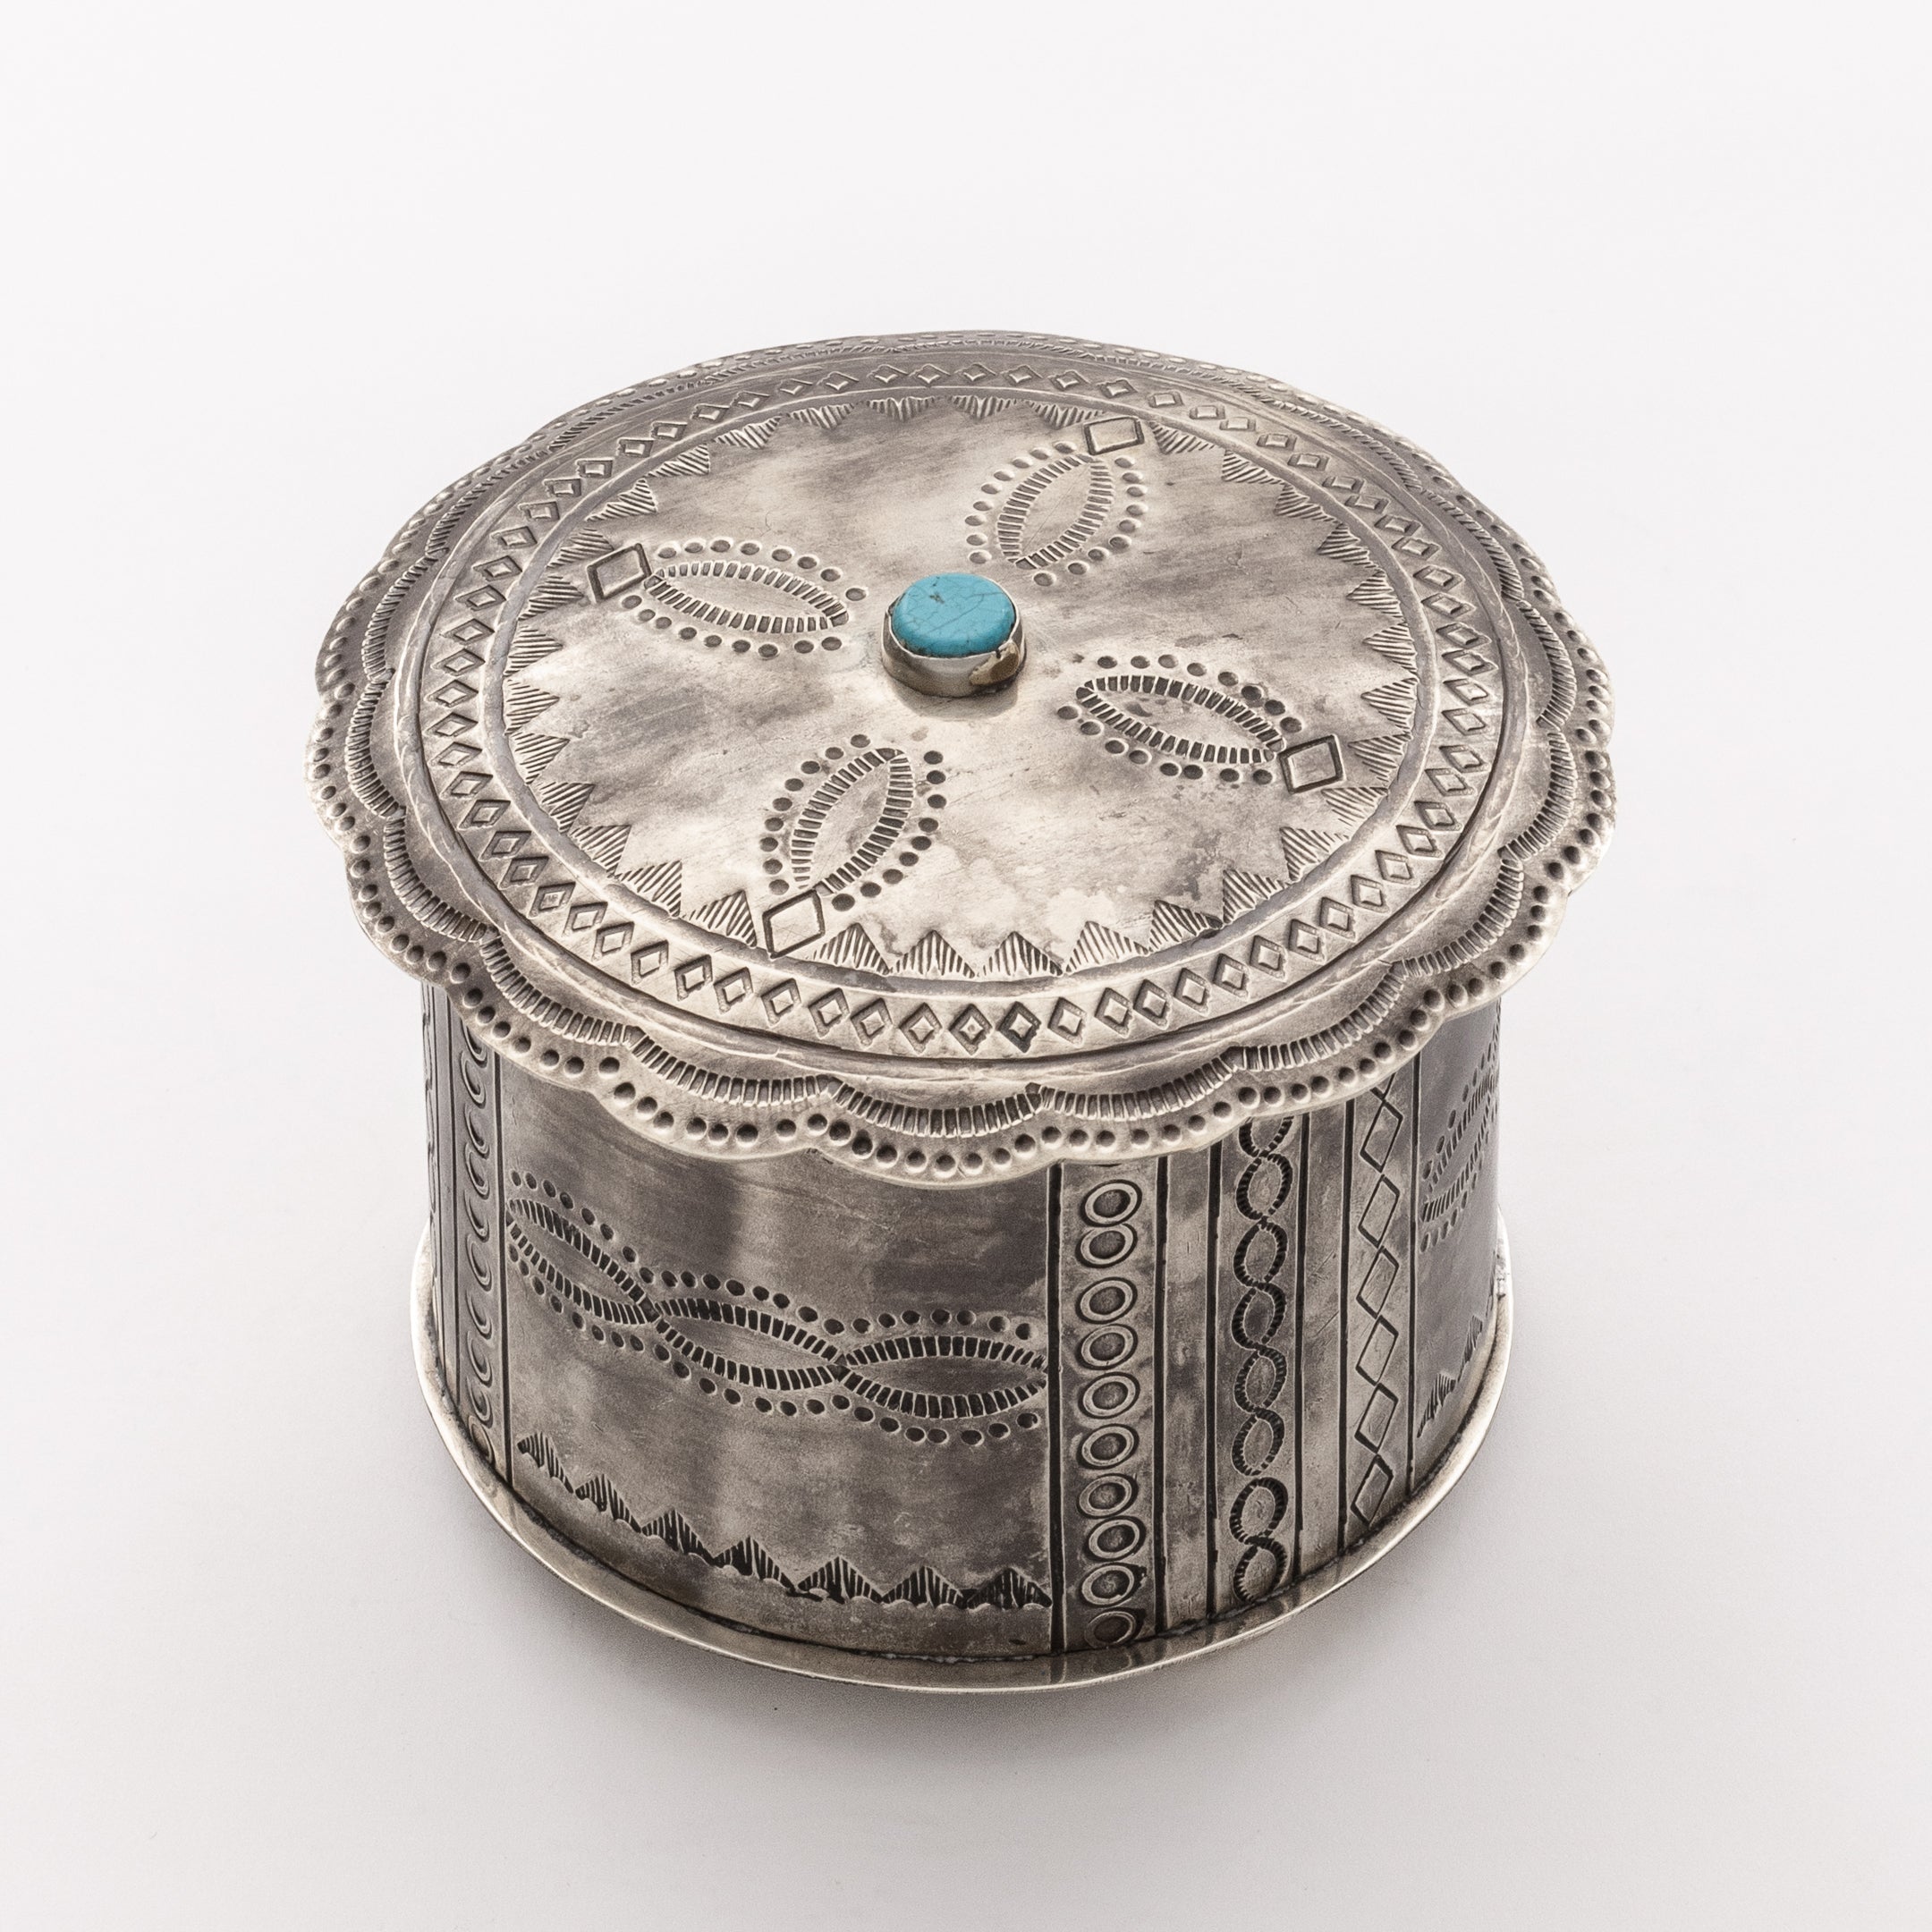 STAMPED ROUND BOX WITH TURQUOISE AND LID